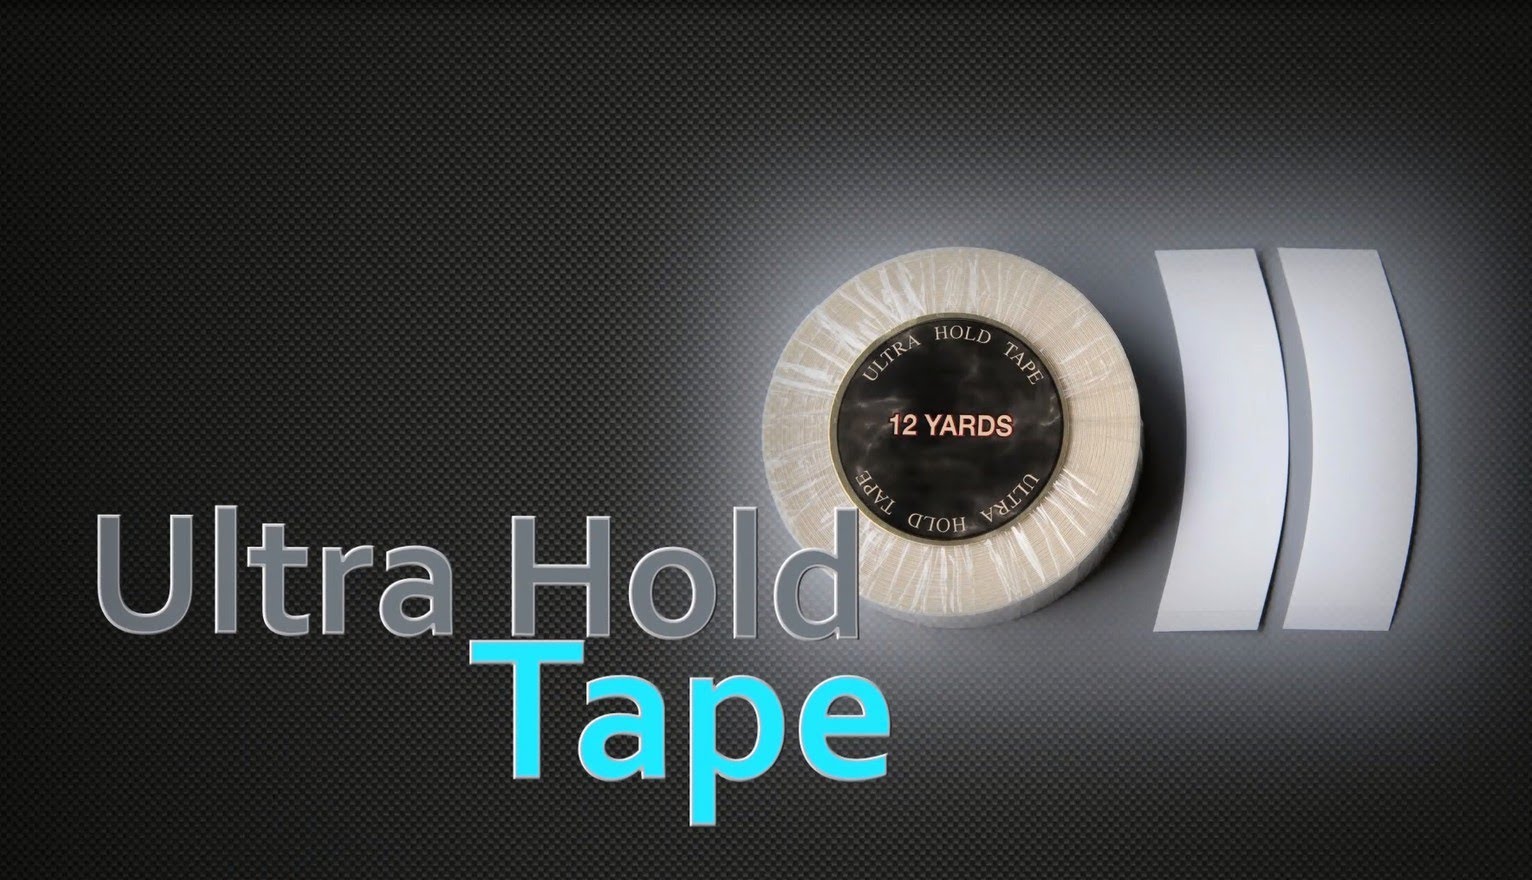 ultra-hold-tape